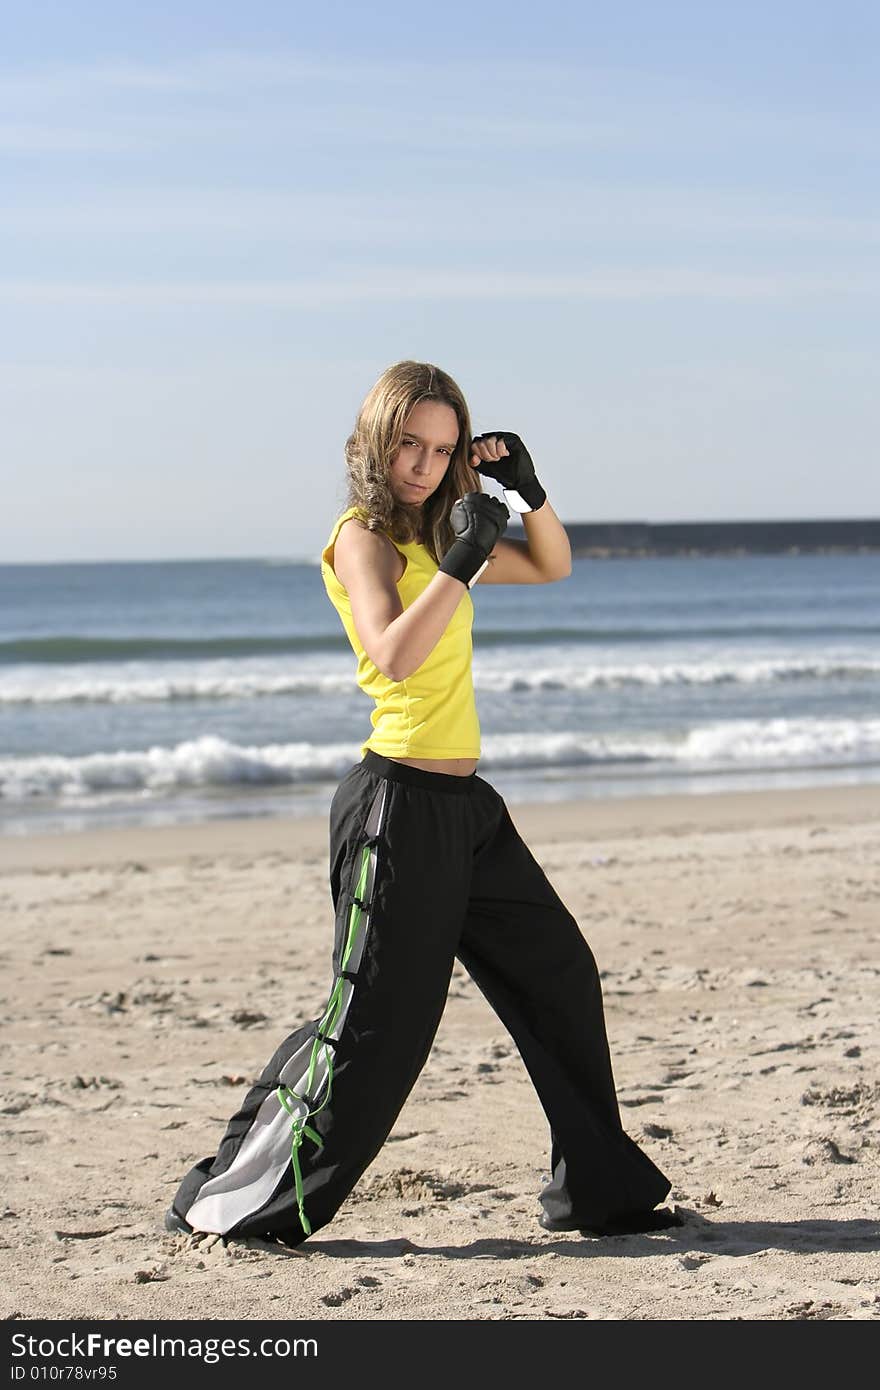 Girl fighting in a the beach